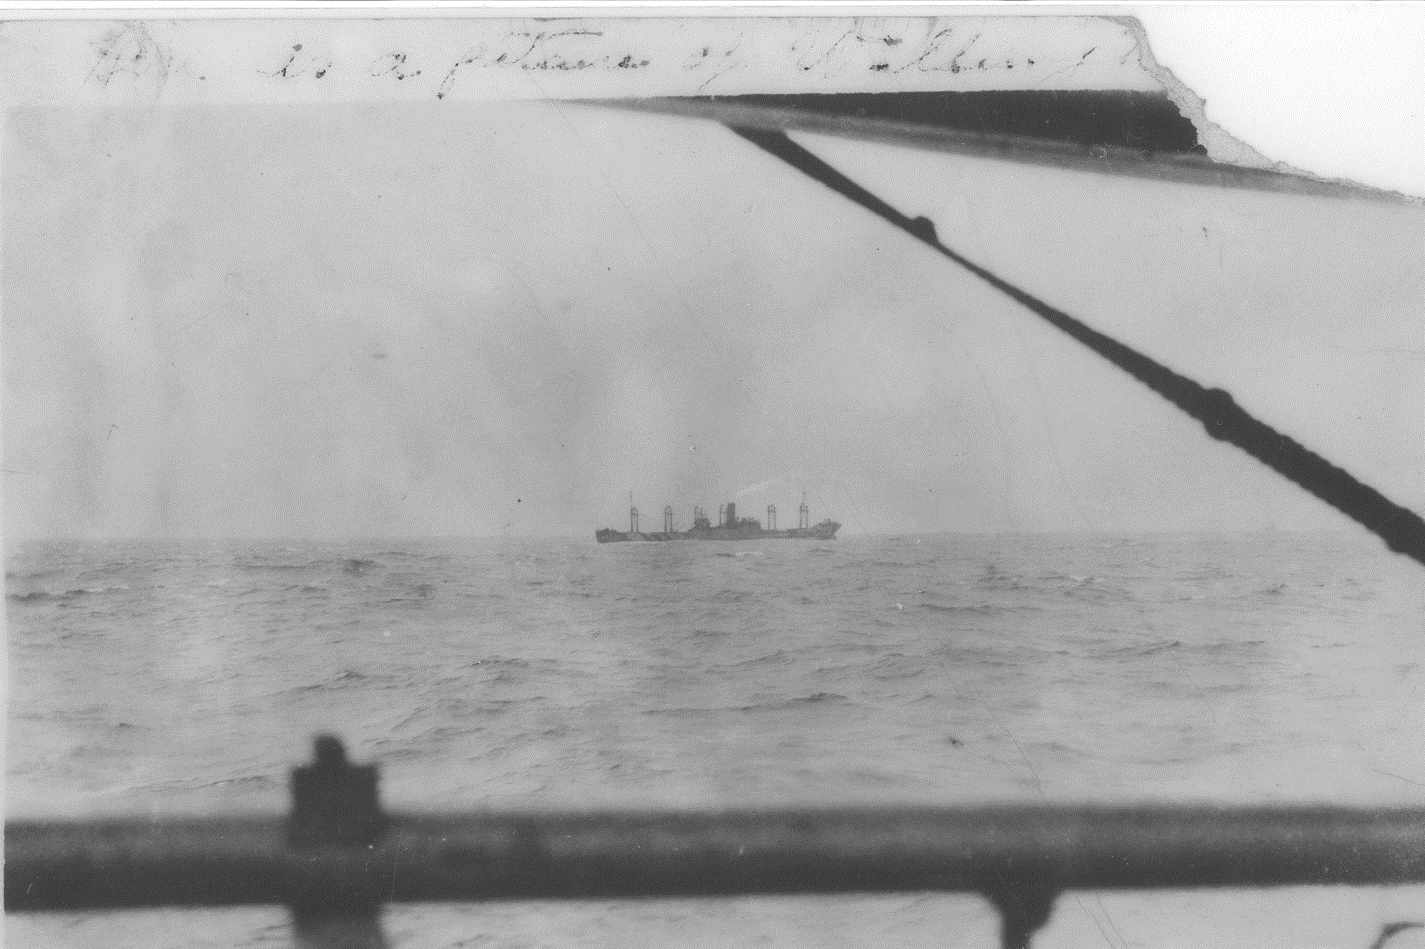 6.	Photograph of Wellington’s crewmembers in lifeboats after abandoning ship. (Coast Guard Collection)